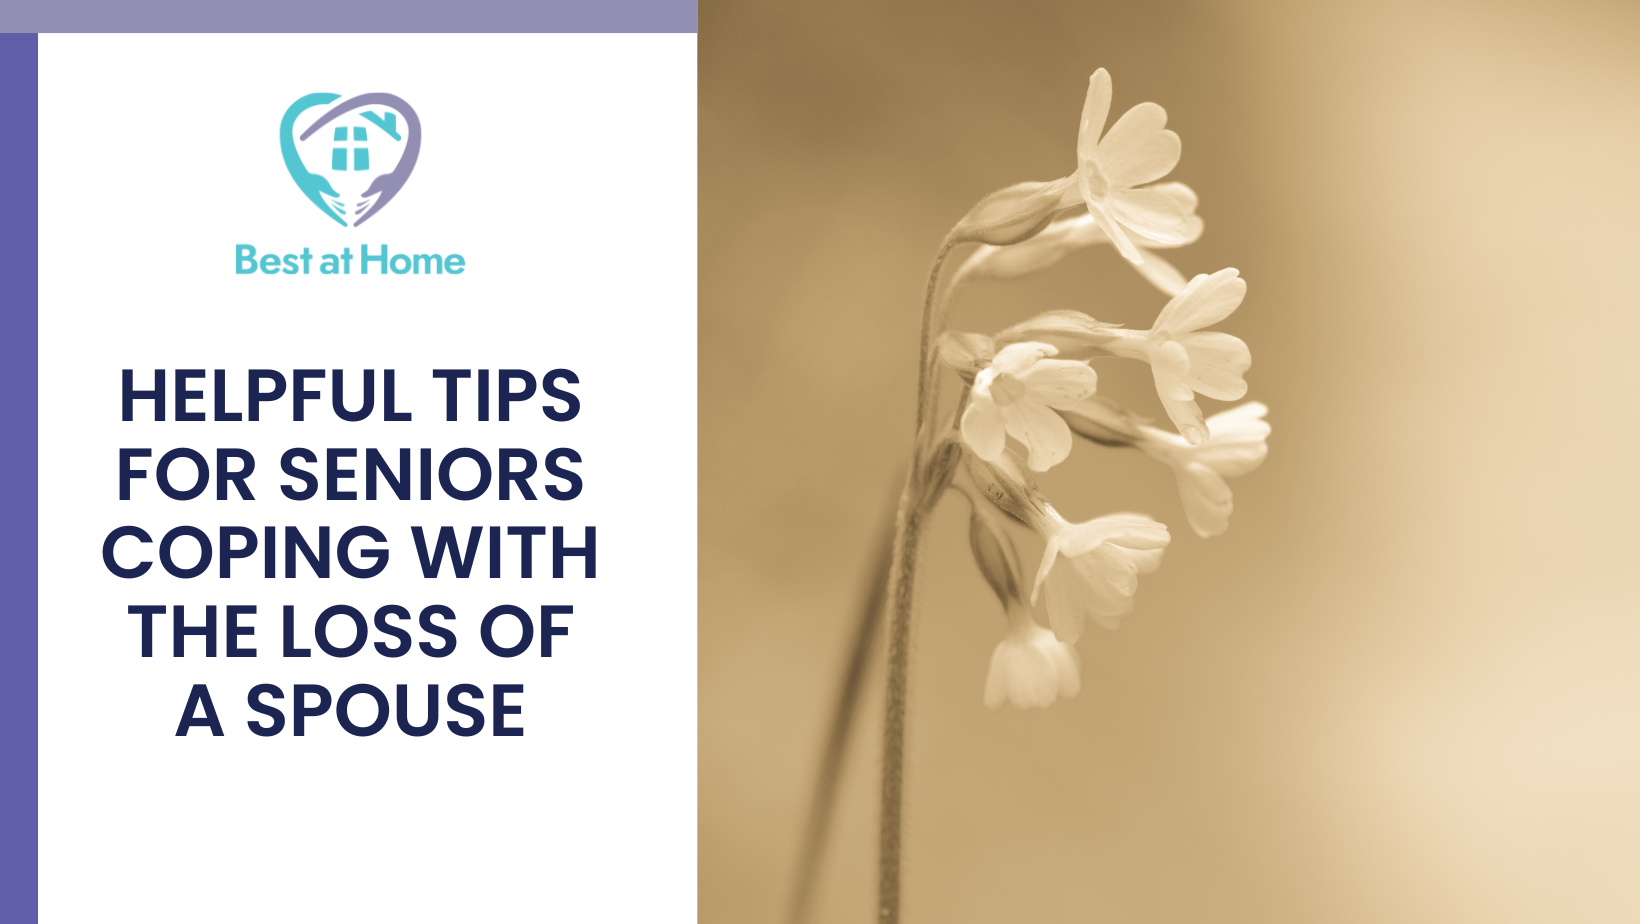 Helpful Tips for Seniors Coping with the Loss of a Spouse